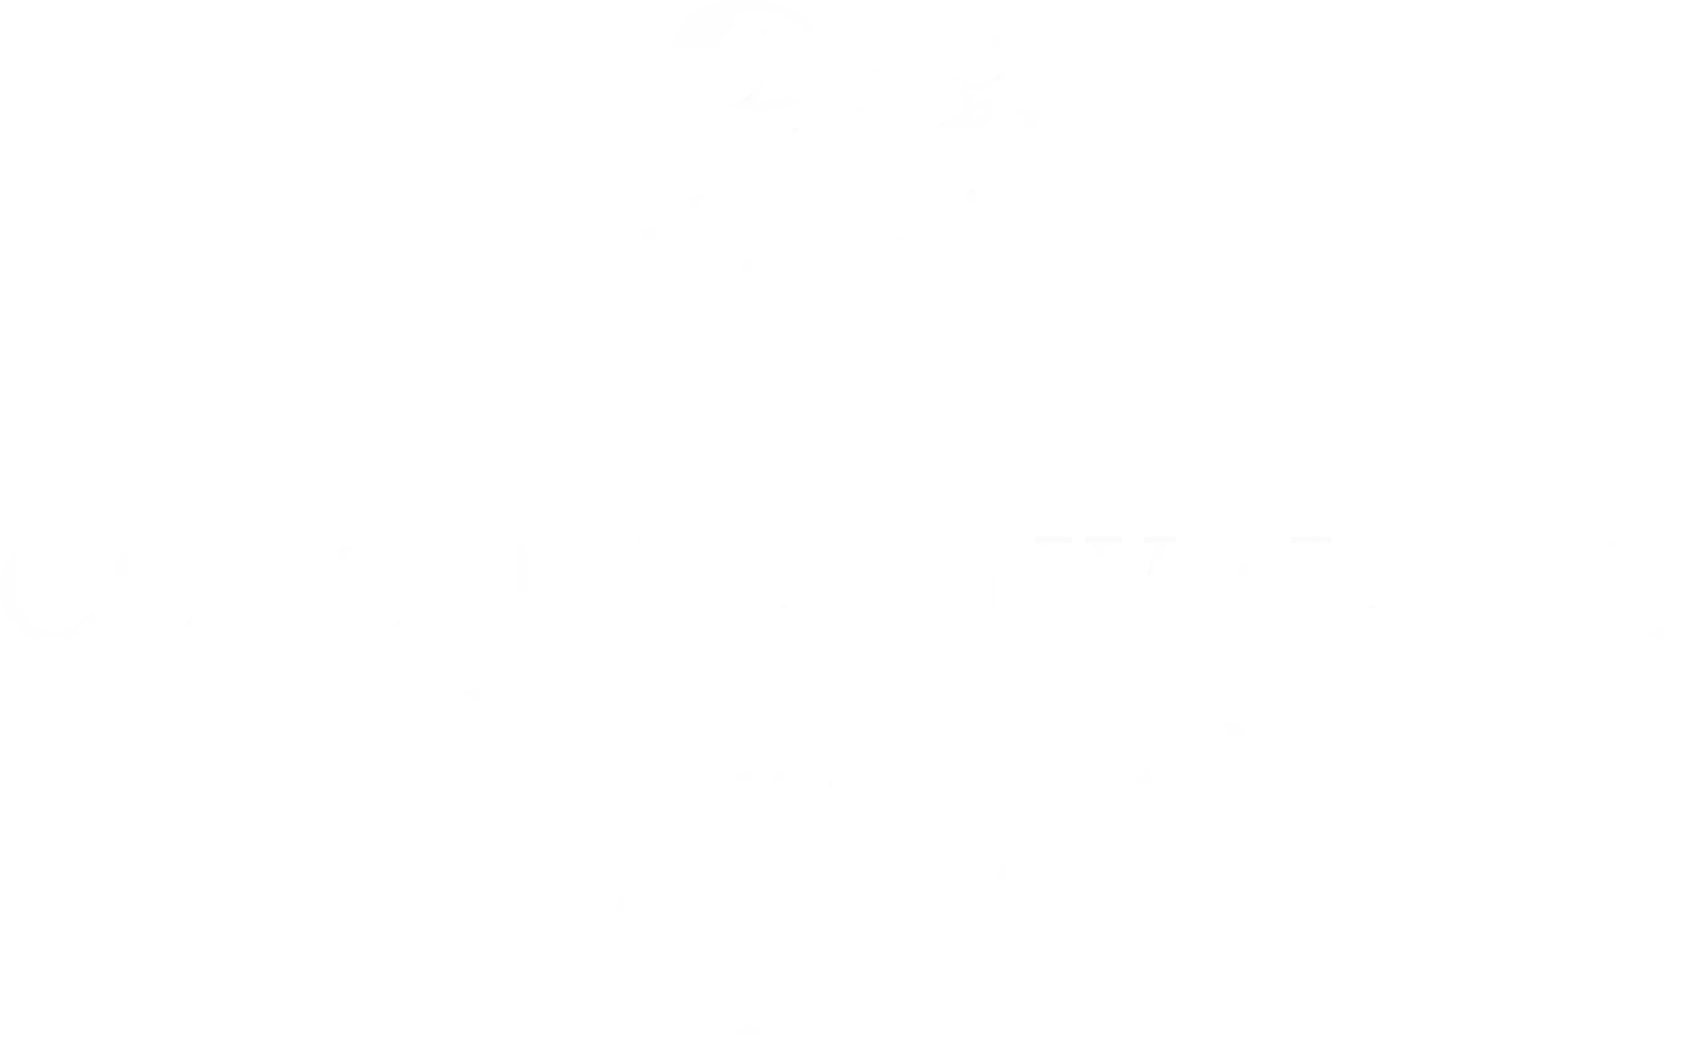 Colonial Jewelers of Easton